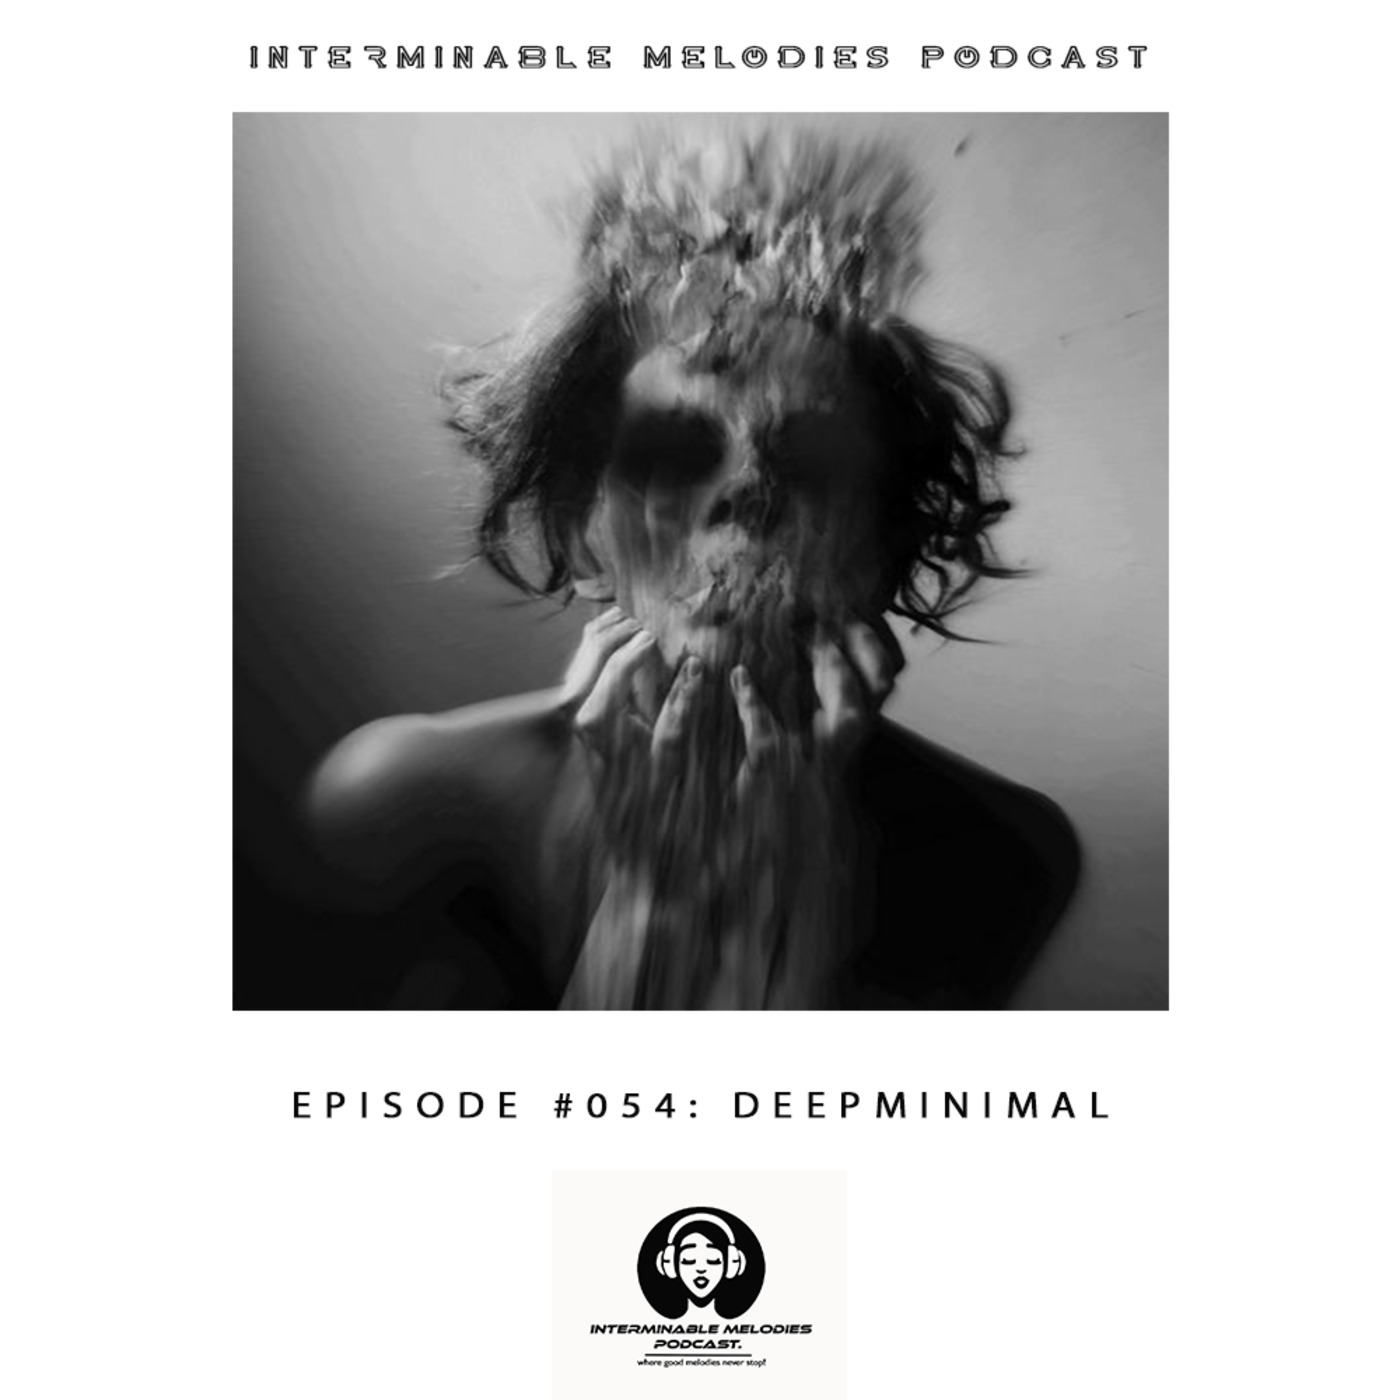 Interminable Melodies Podcast #054 Guest Mix DeepMinimal